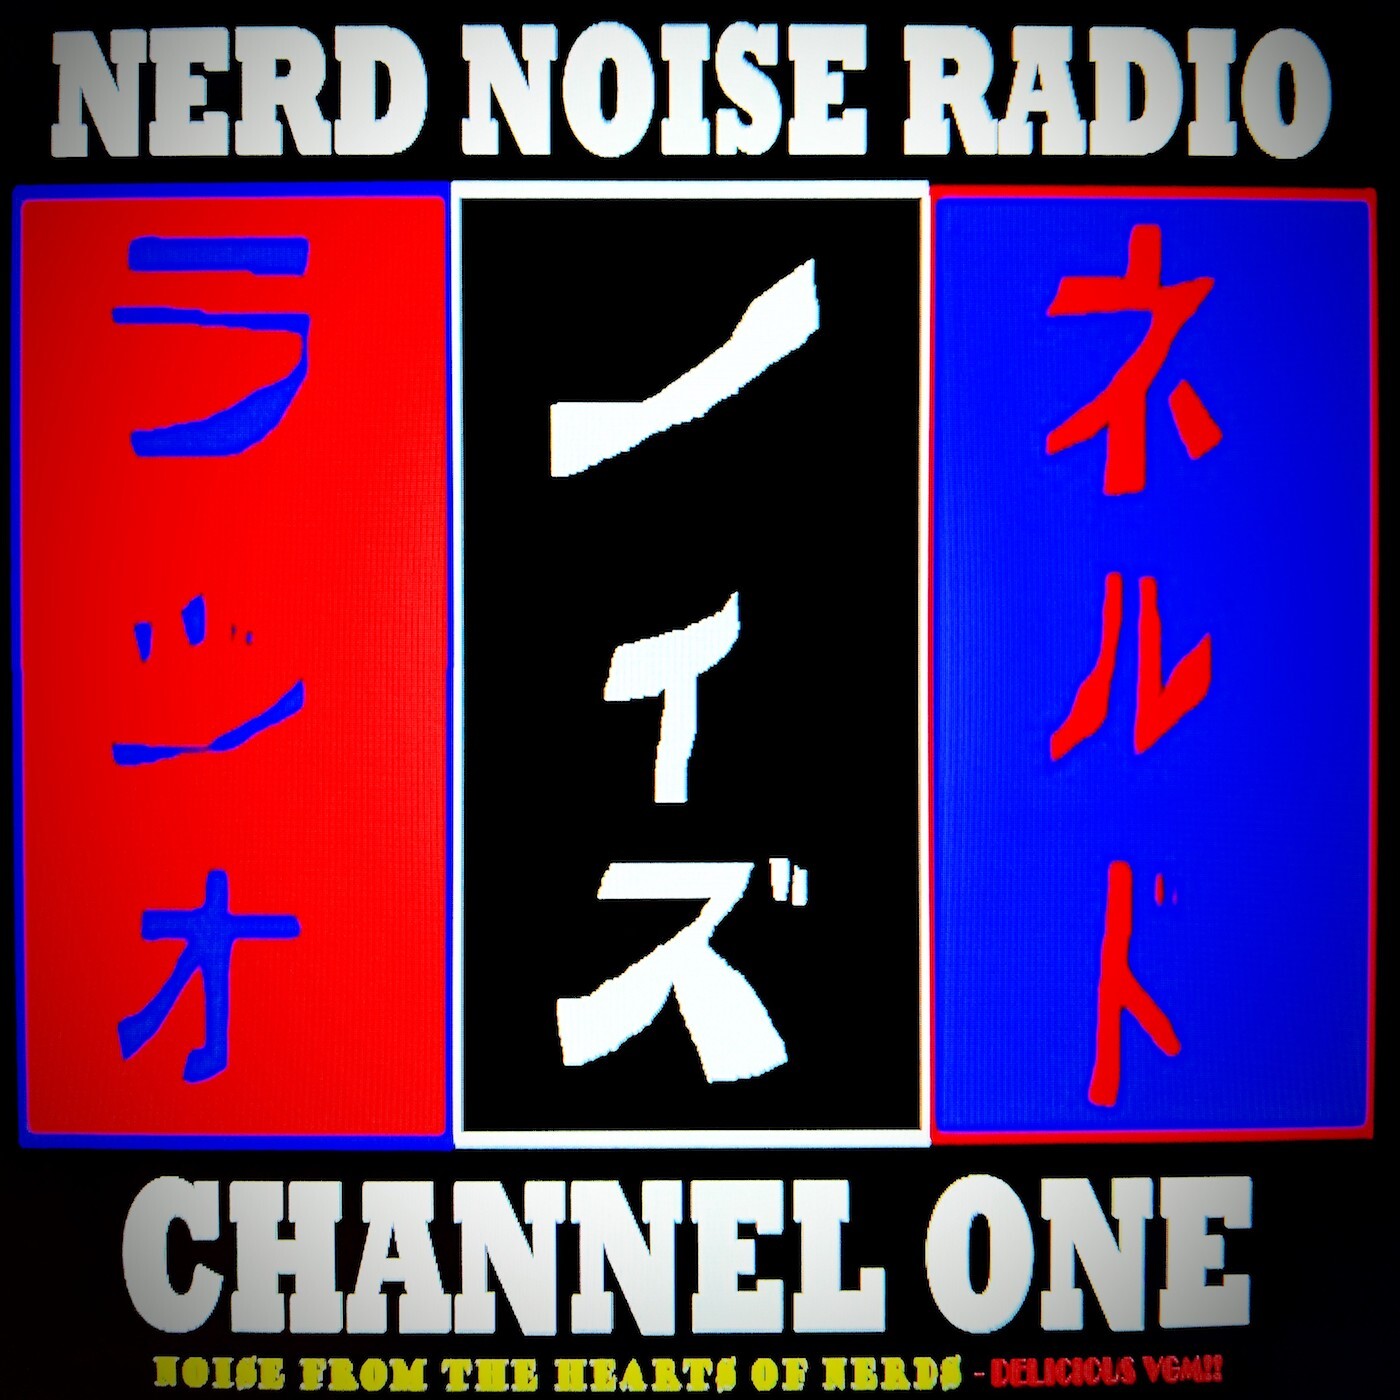 Nerd Noise Radio - Channel 1: ”Noise from the Hearts of Nerds” Podcast - “C1E32: Mishmash Monday - vol. 5”